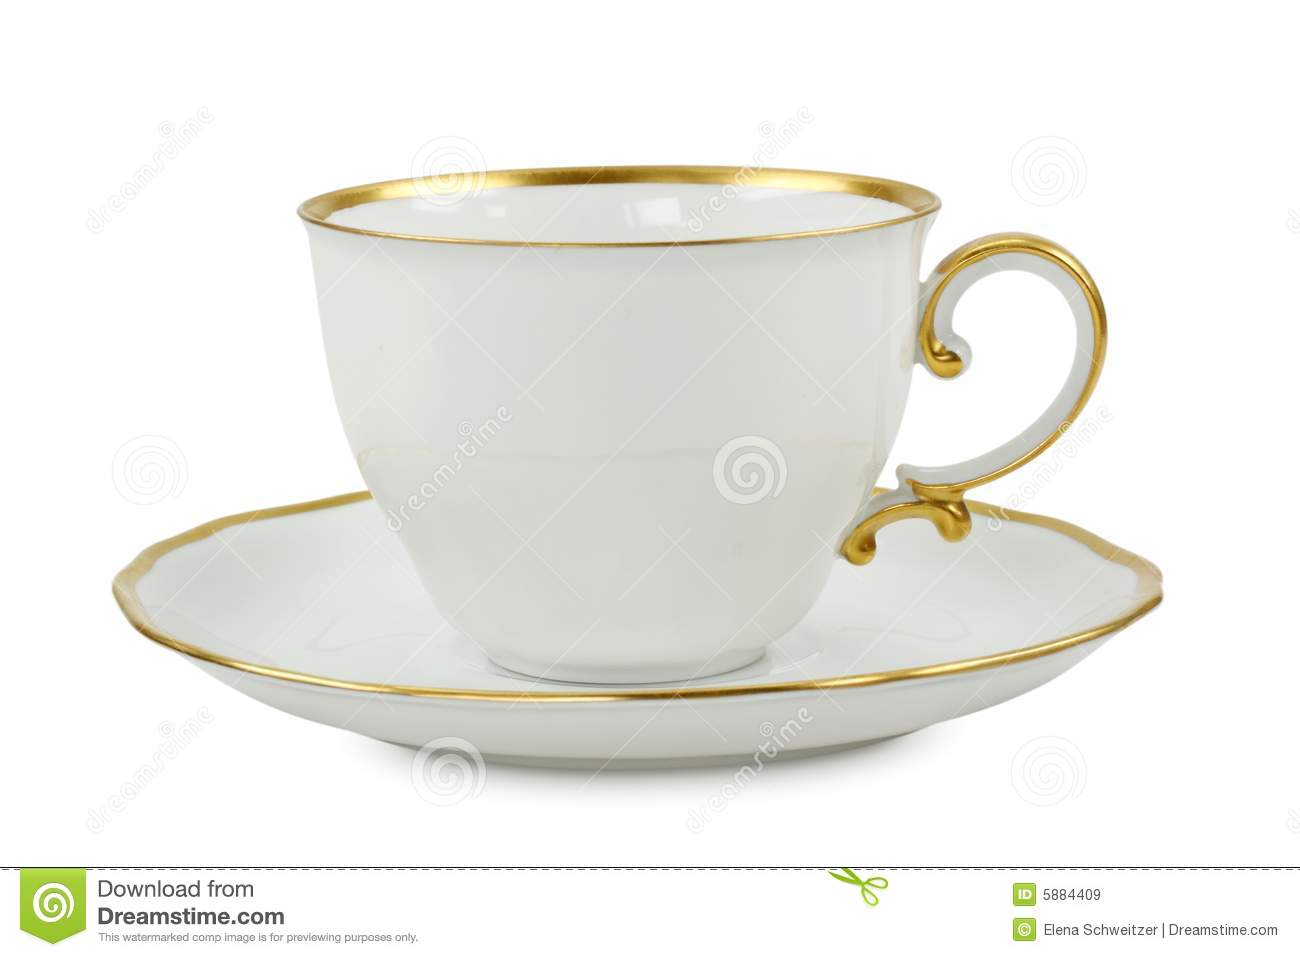 Tea Cup With Plate Royalty Free Stock Images   Image  5884409